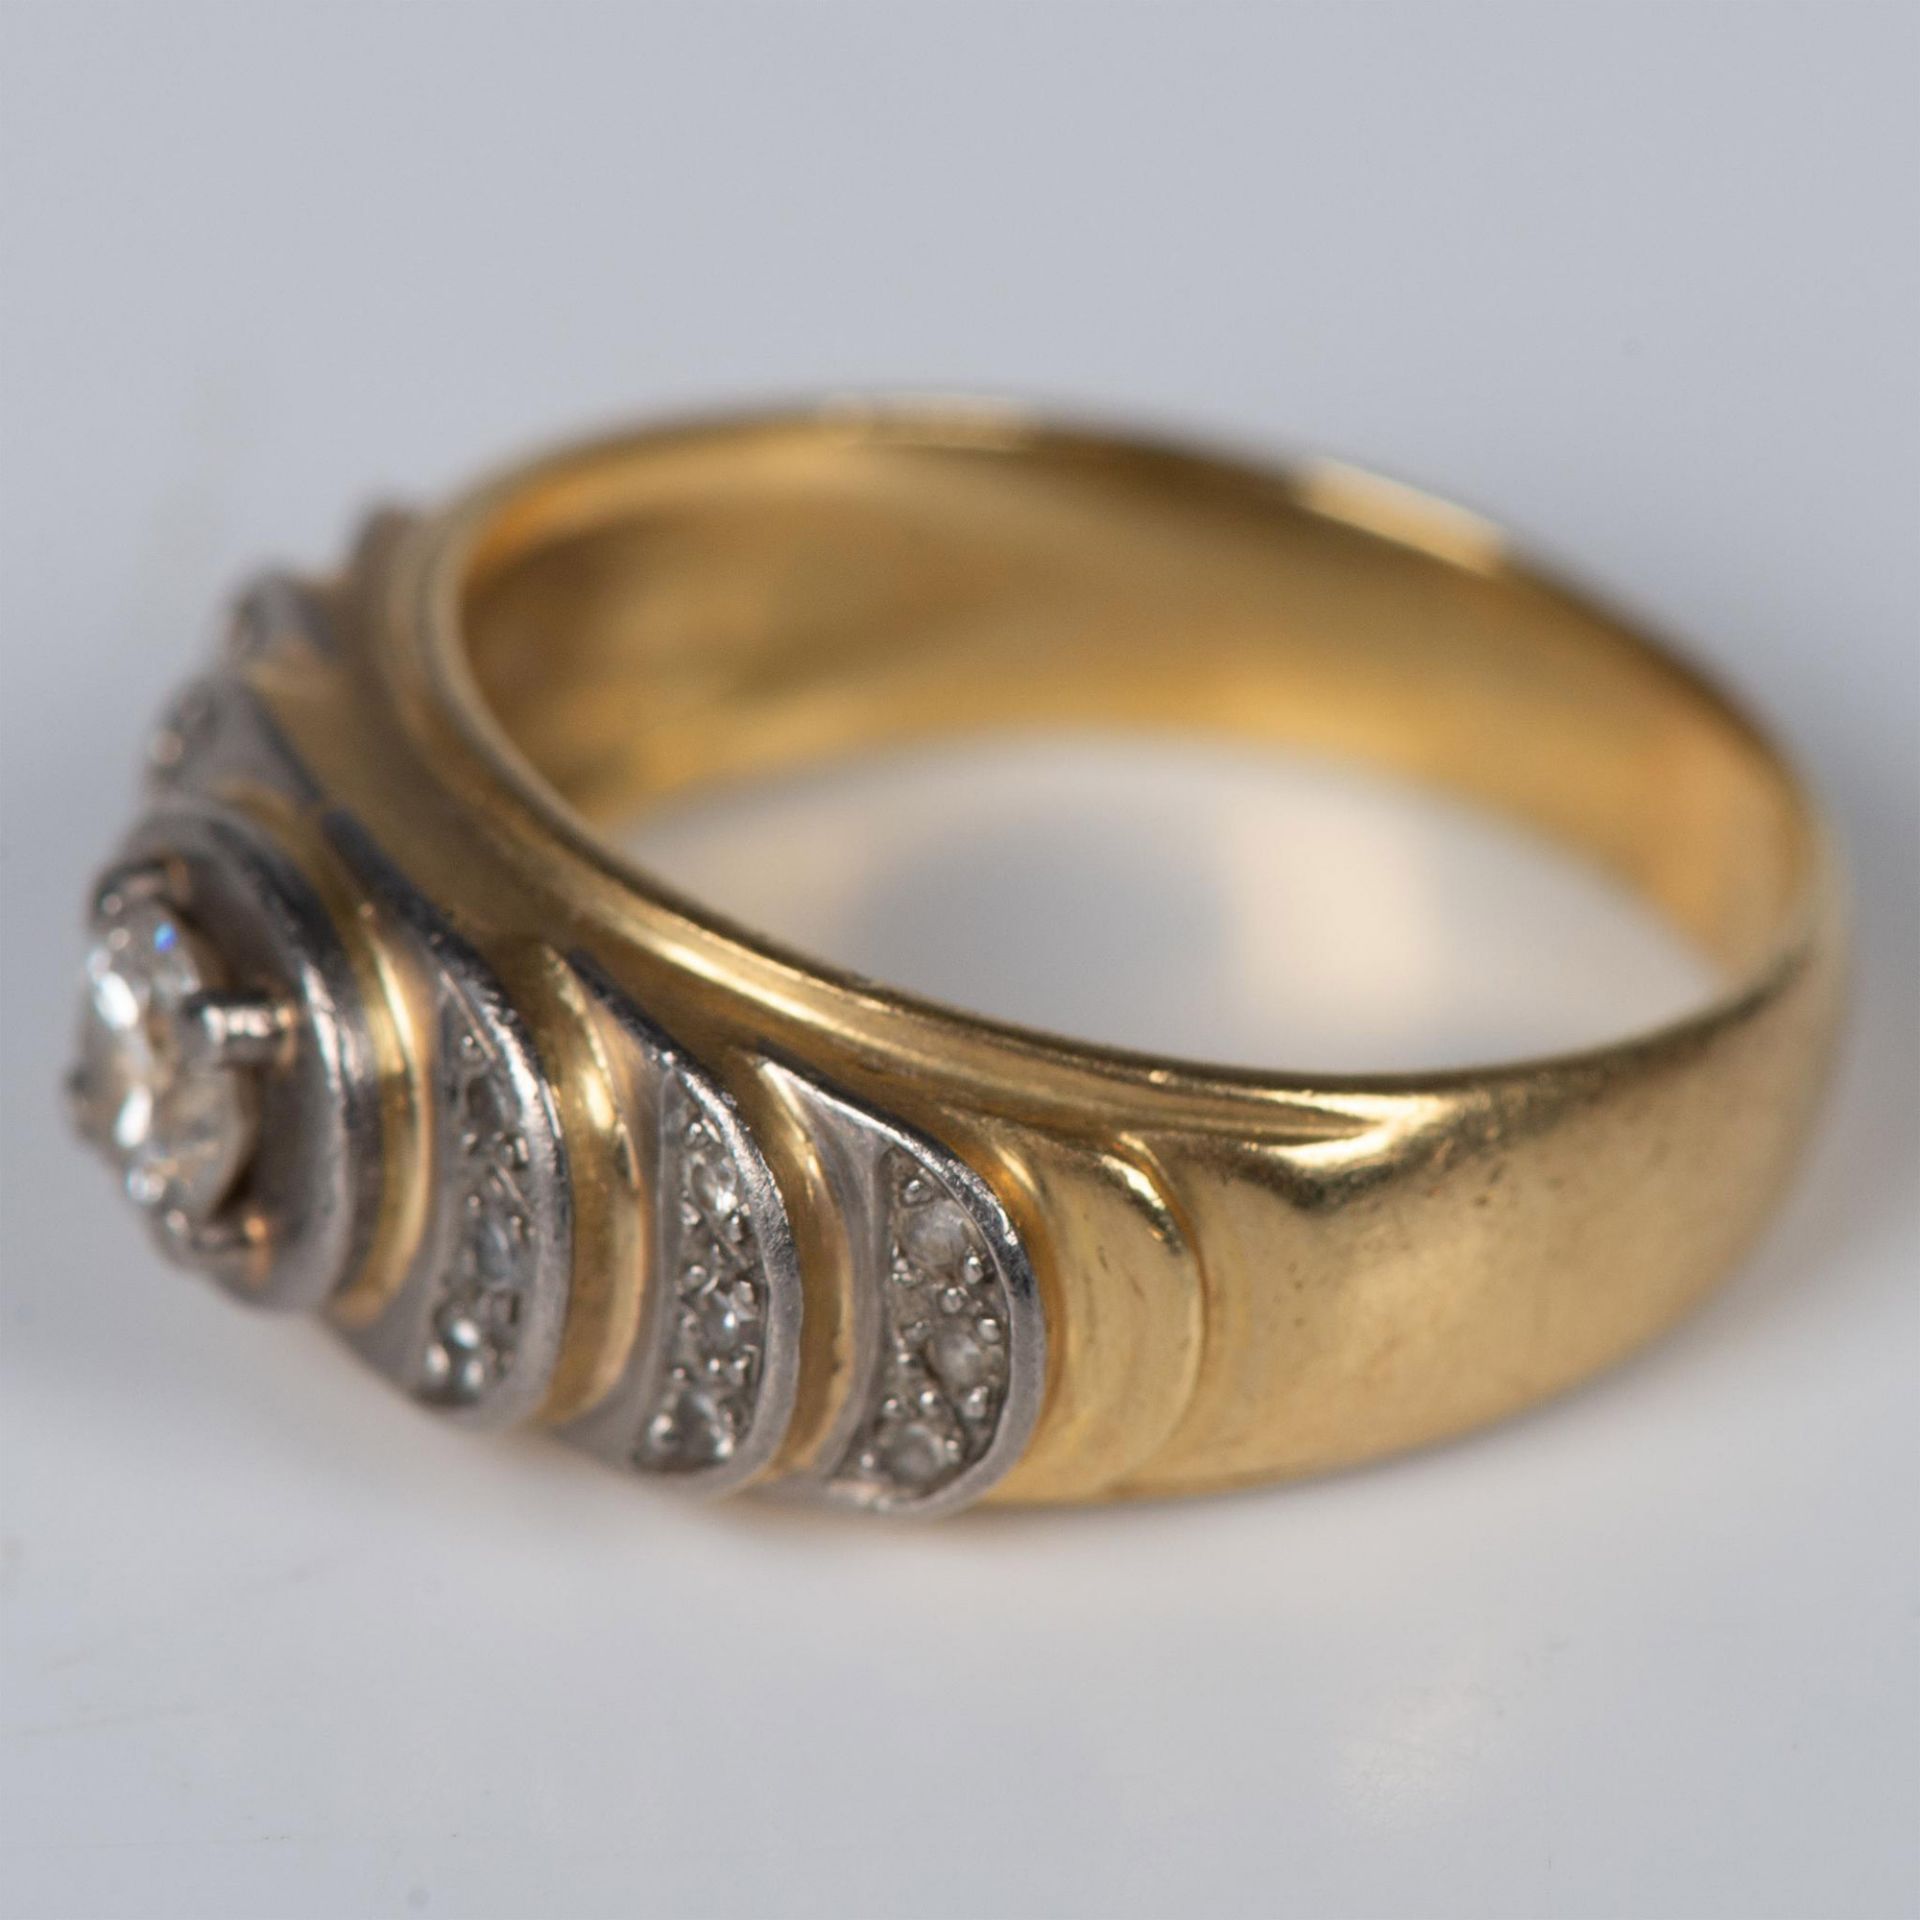 18K Gold and Diamond Ring - Image 2 of 7